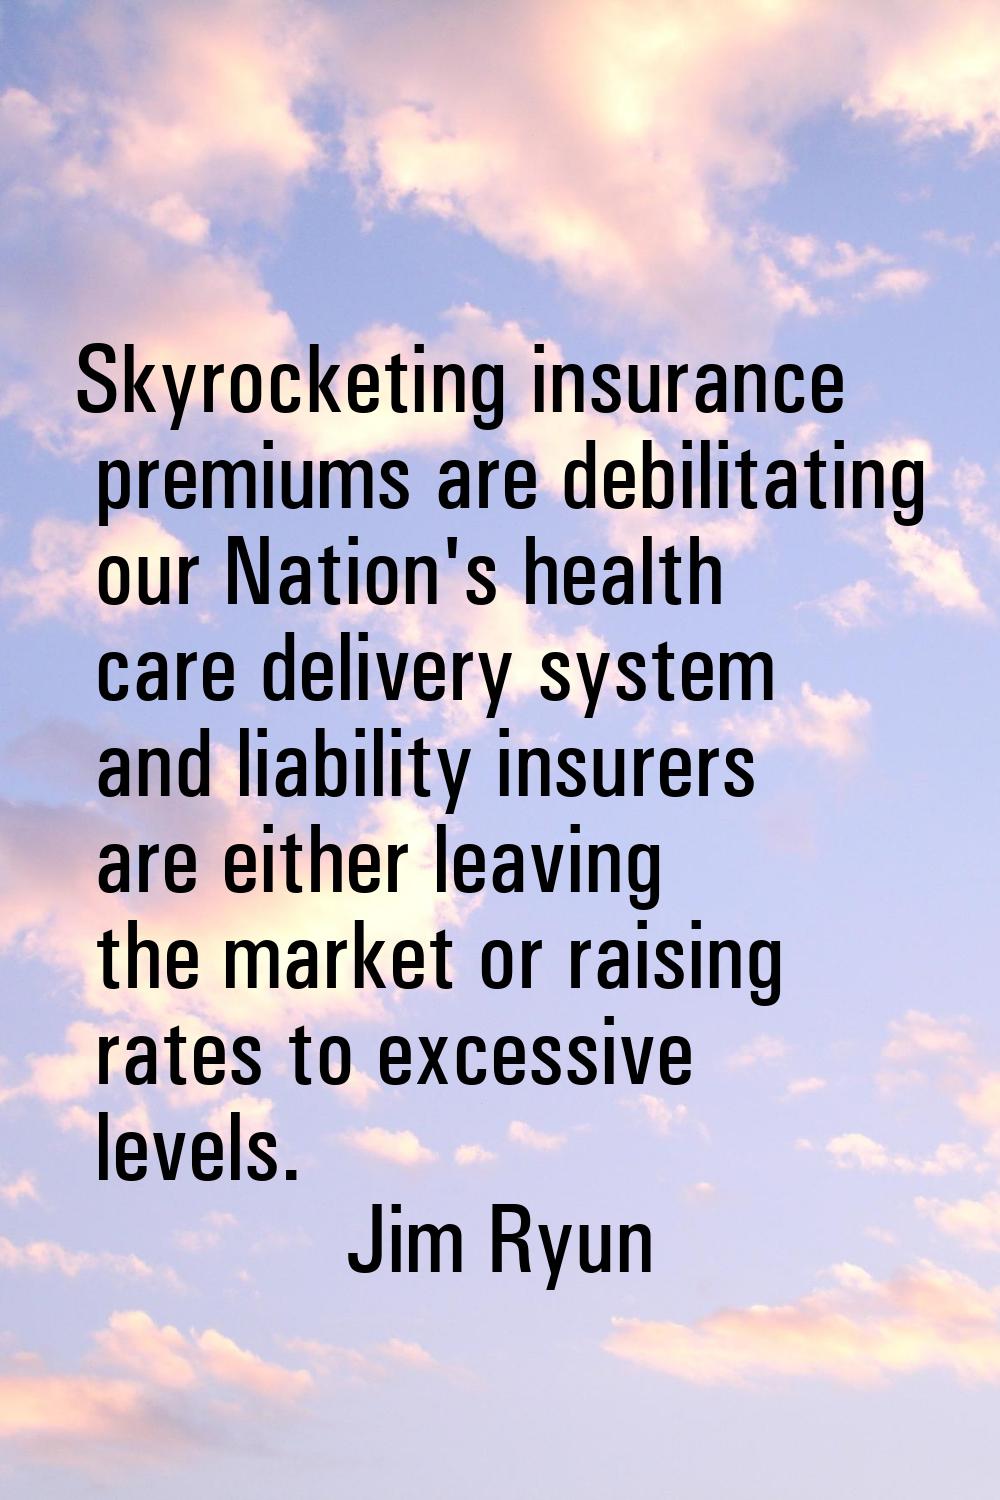 Skyrocketing insurance premiums are debilitating our Nation's health care delivery system and liabi